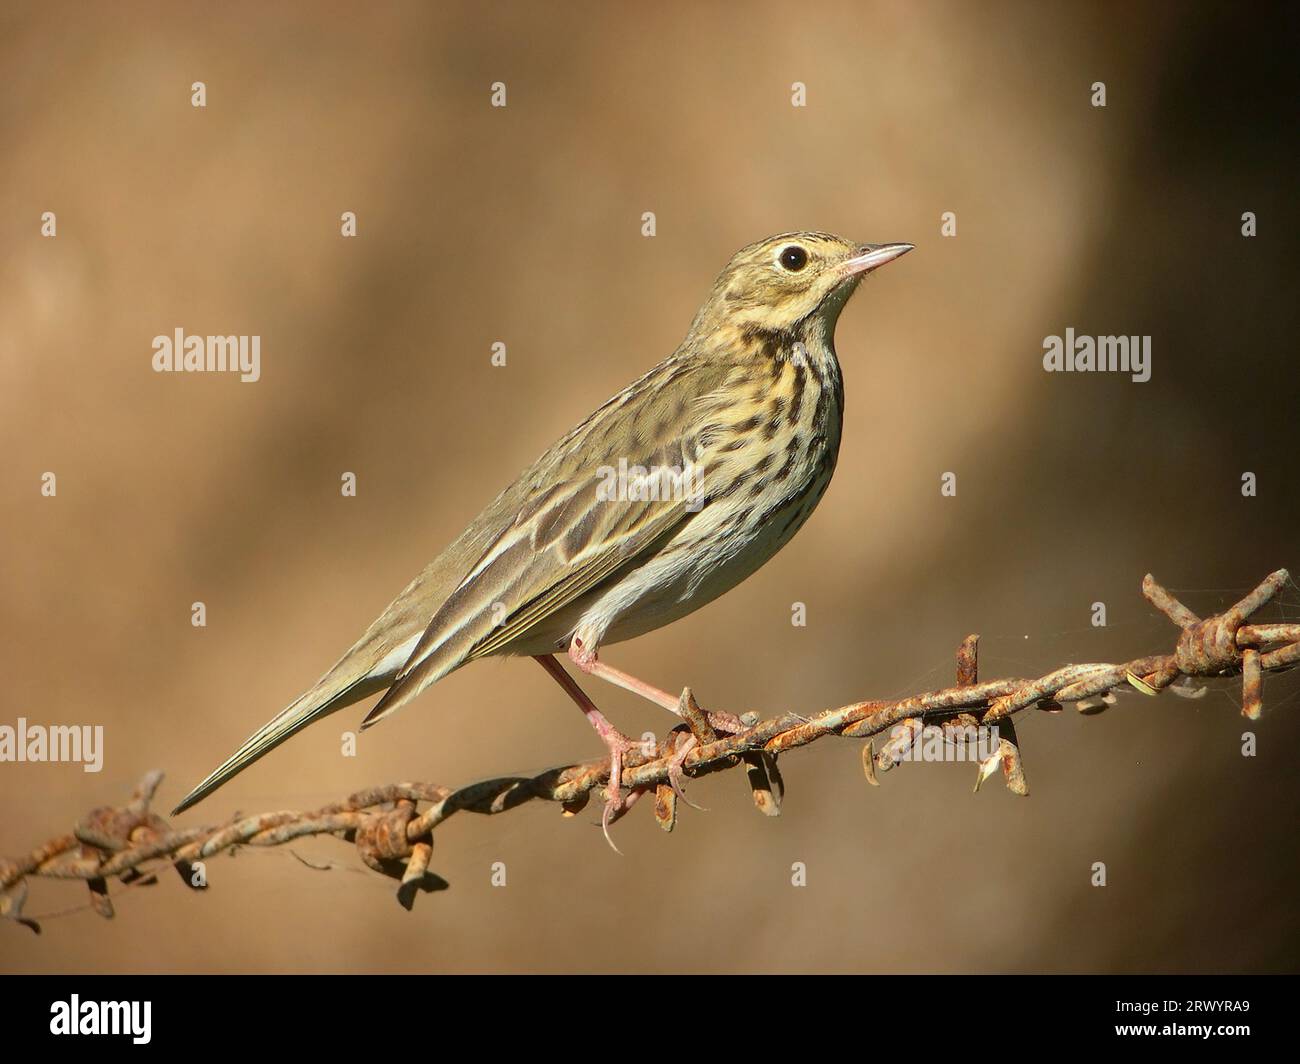 Tree pitpit (Anthus trivialis), First-winter perched on barbed wire, Oman Stock Photo